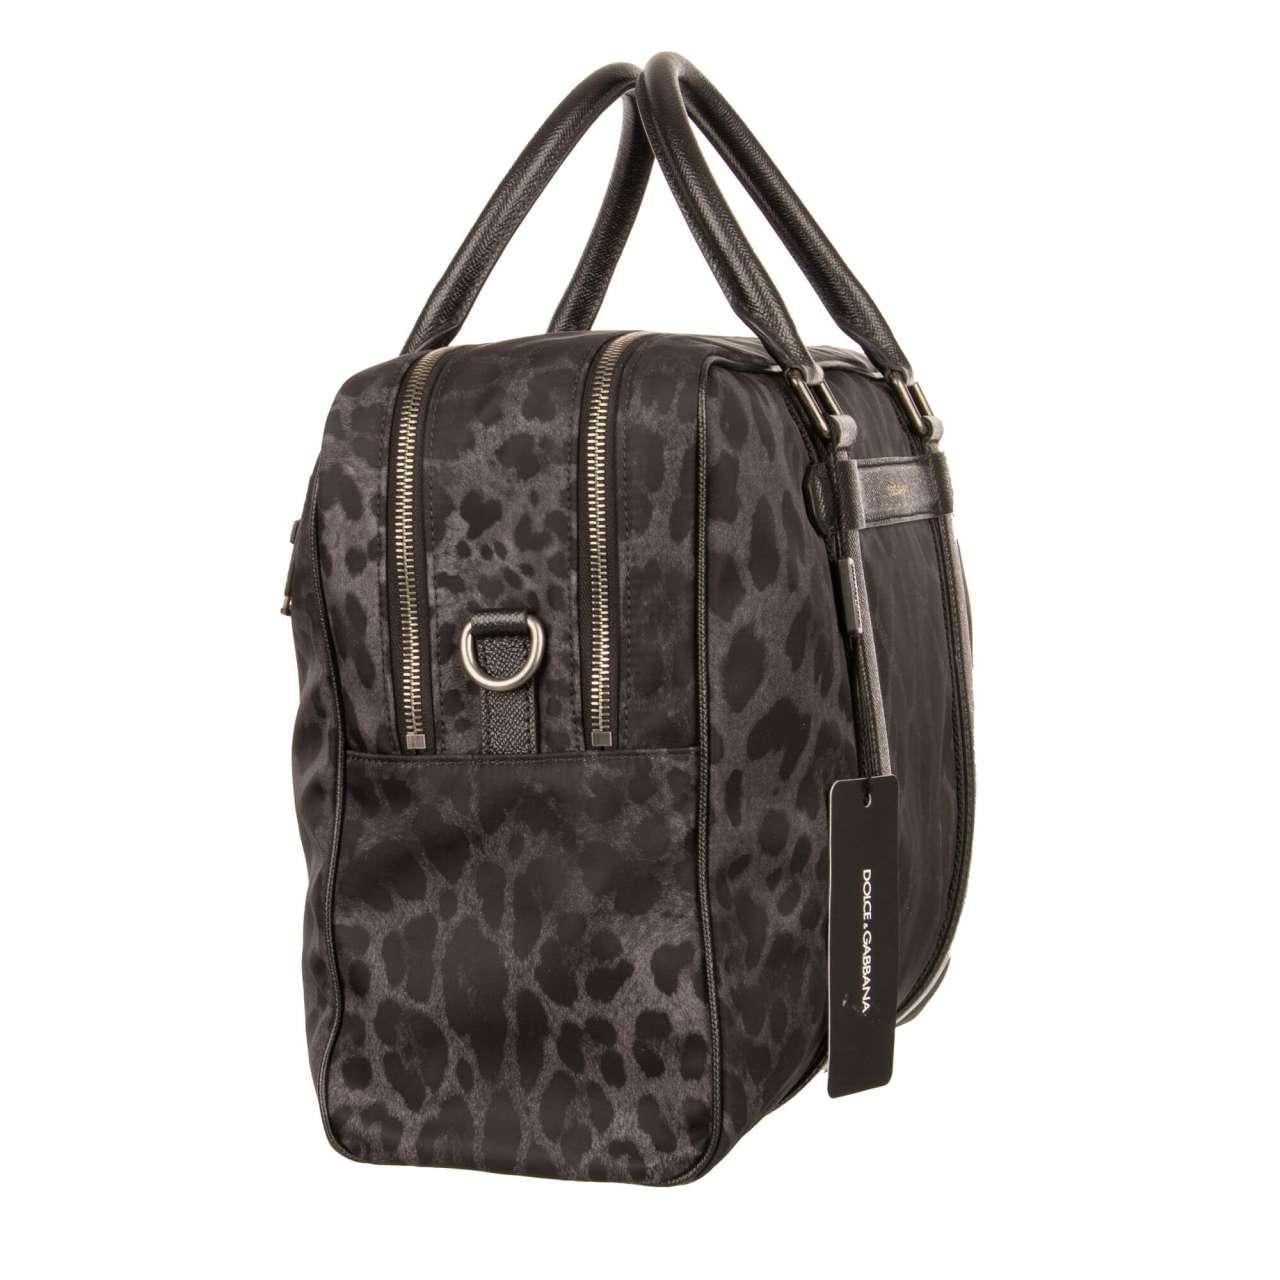 Men's D&G Leopard Printed Nylon Briefcase Bag with Logo and Pockets Black Gray For Sale